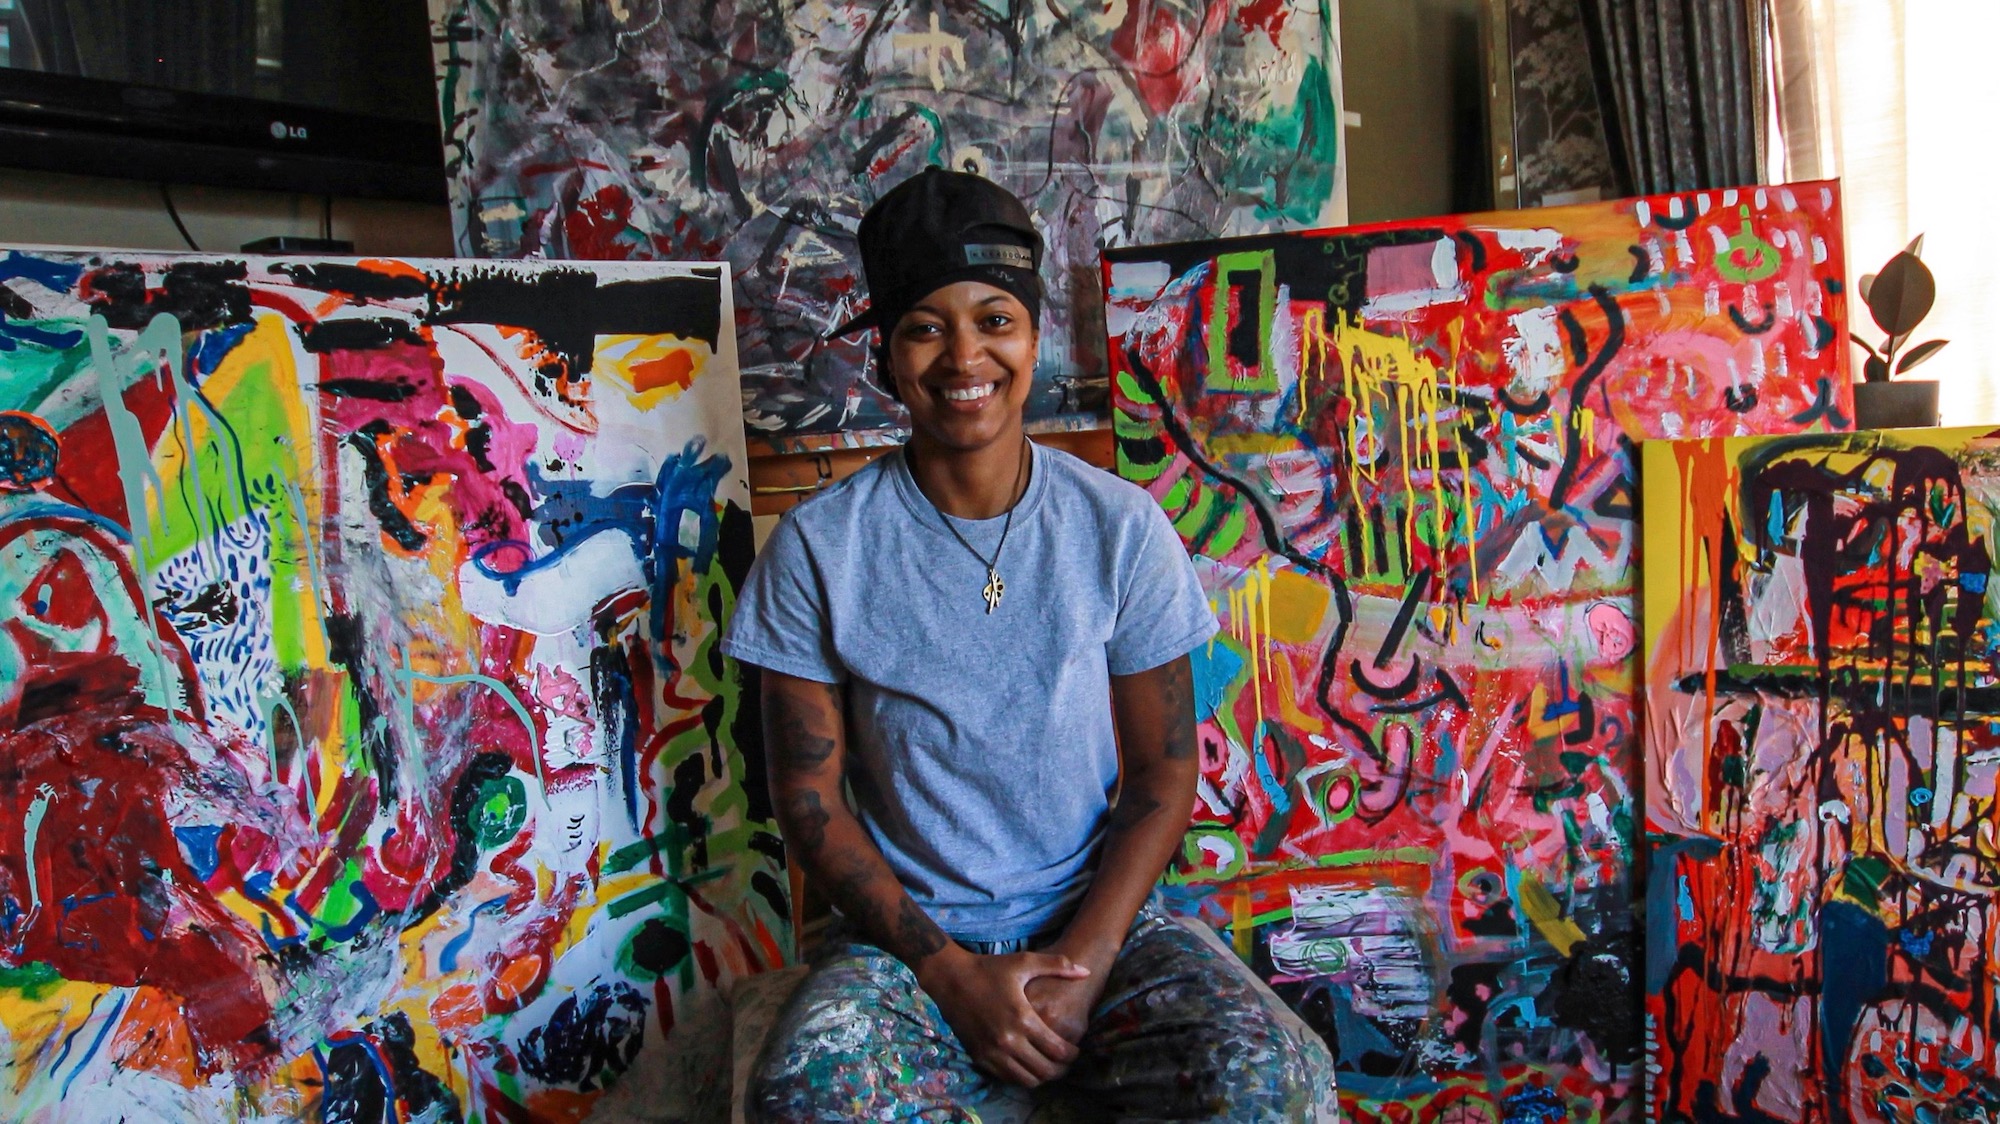 Mireka Starr sits in front of her artwork. Her painting style is inspired by Davyd Whaley, an American abstract artist who helped her realize her passion for art.